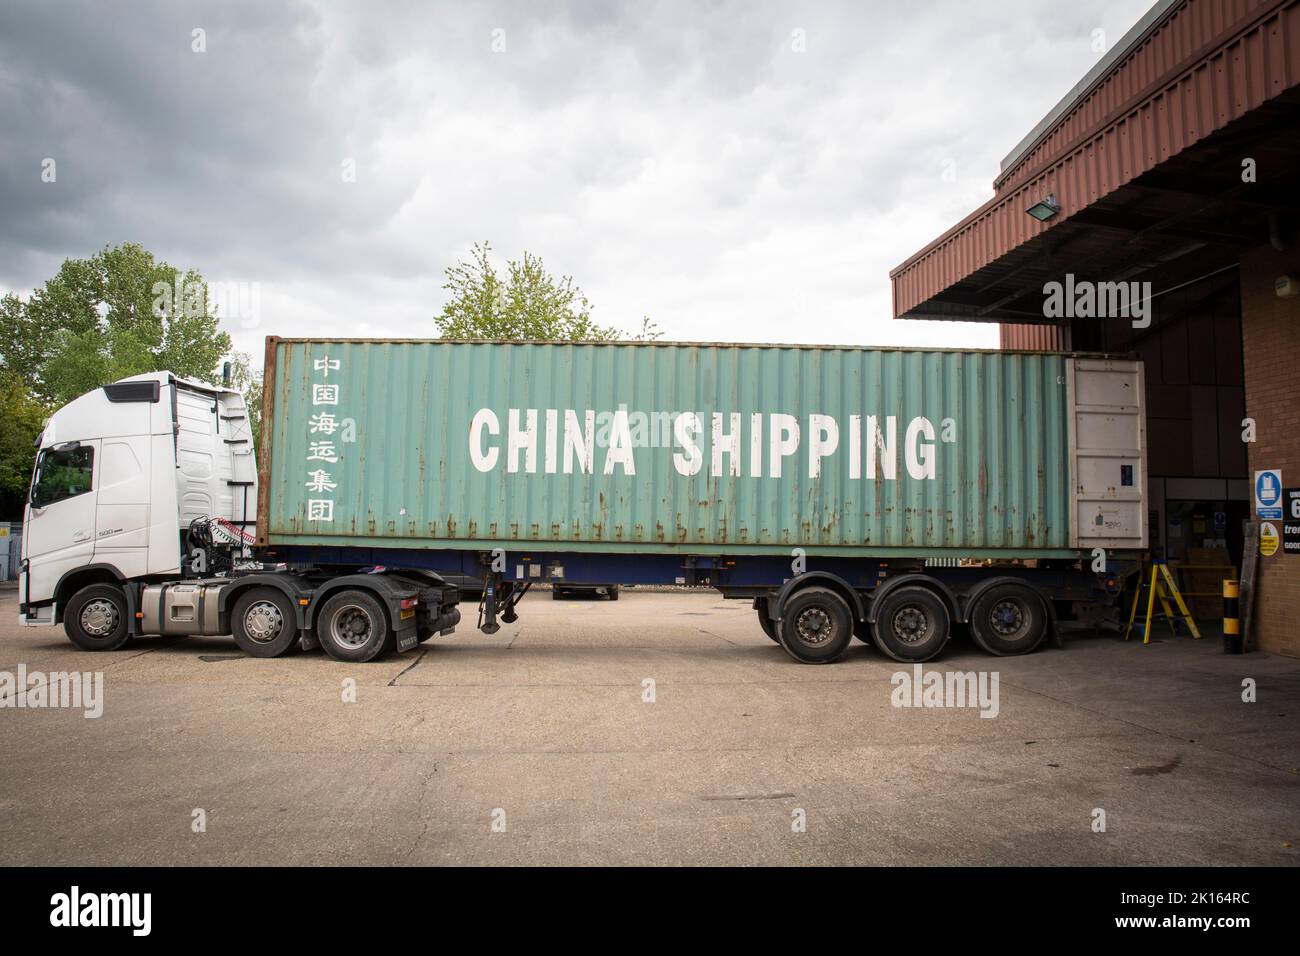 truck delivering cargo and goods in shipping containers, to a warehouse of a business, watford , uk Stock Photo